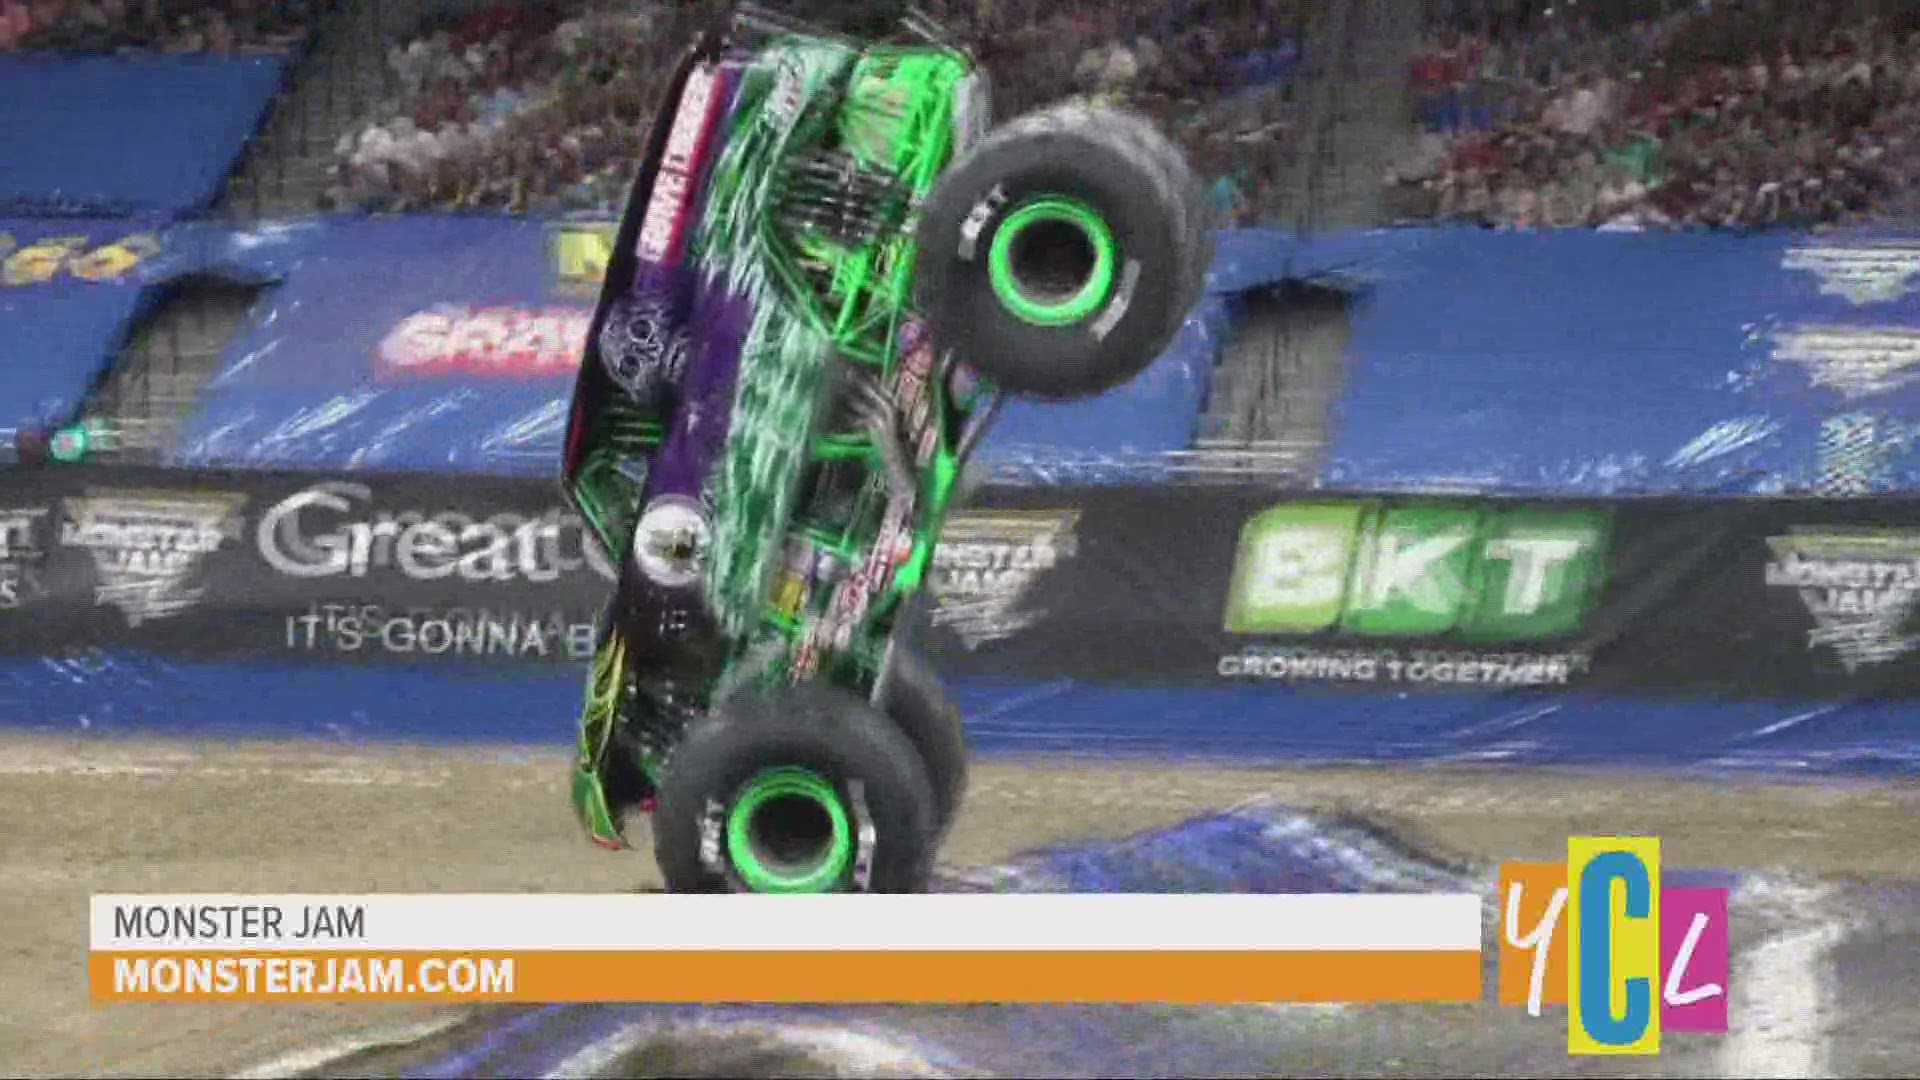 We talk to Brandon Vinson, driver athlete, Grave Digger. The following is a paid segment sponsored by Monster Jam.